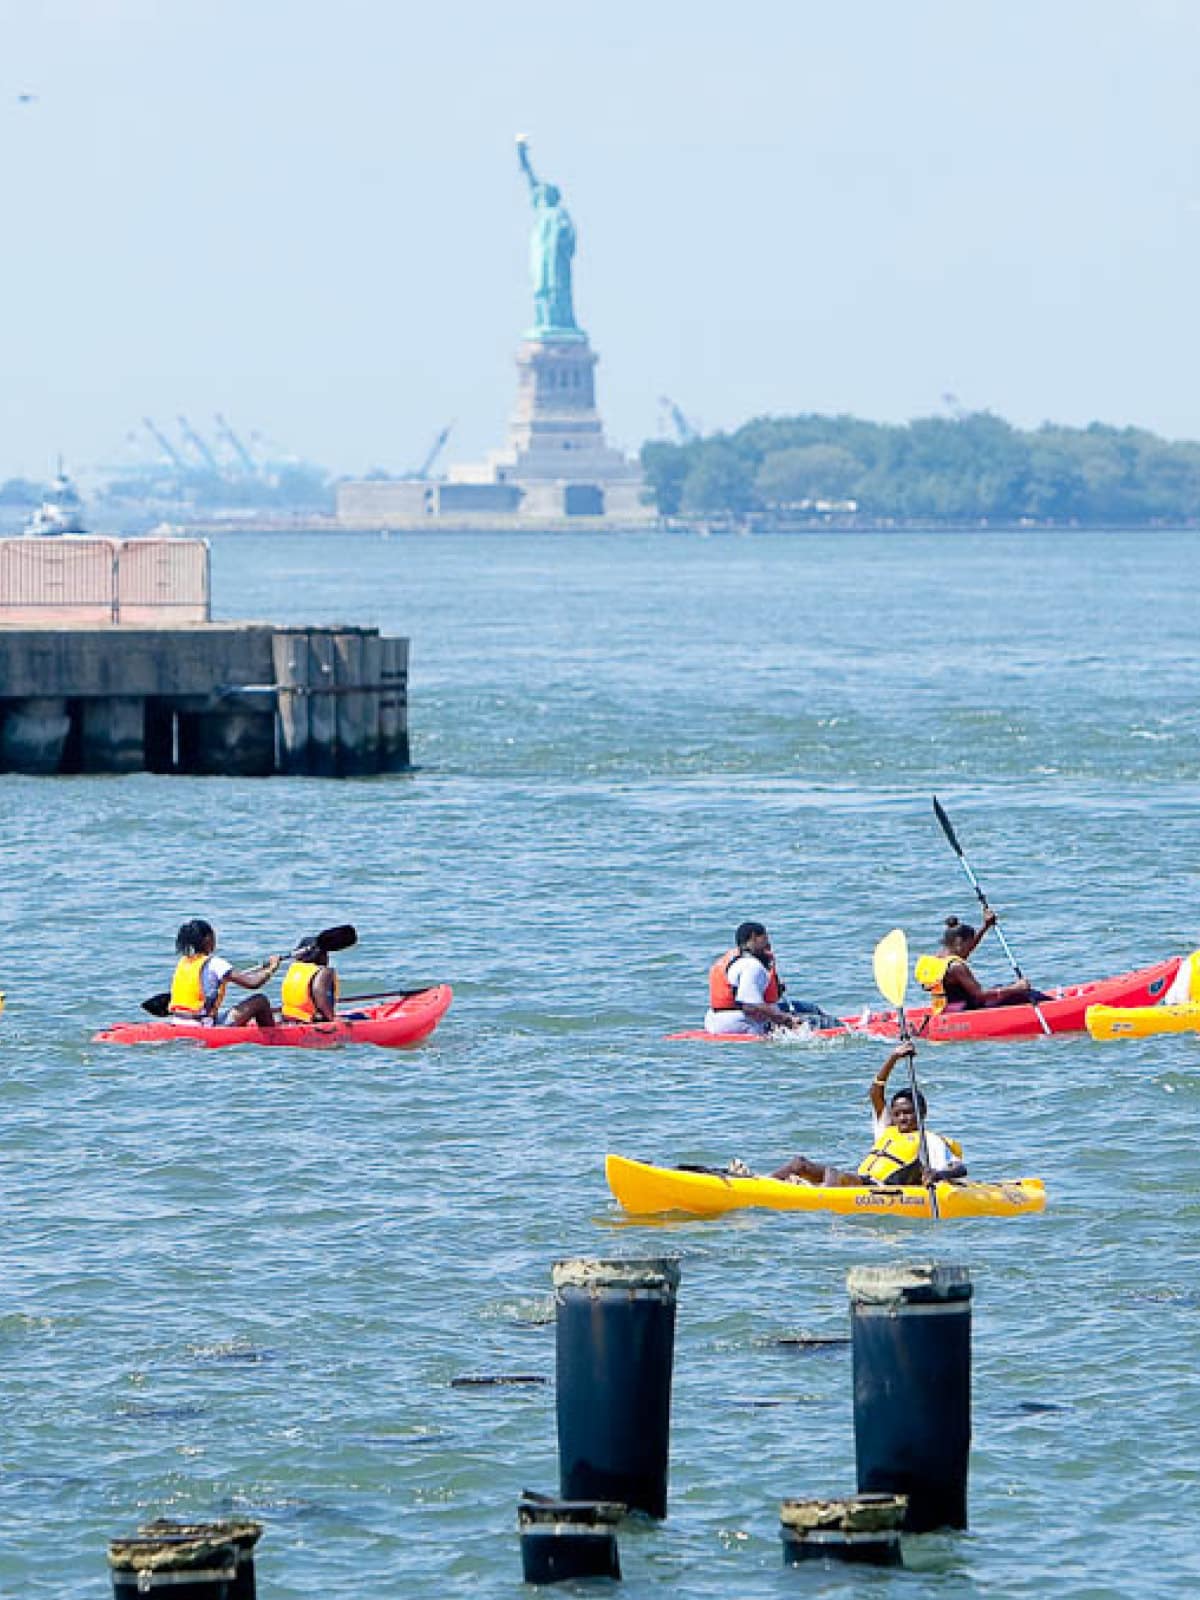 People in kayaks with the Statue of Liberty in the background.